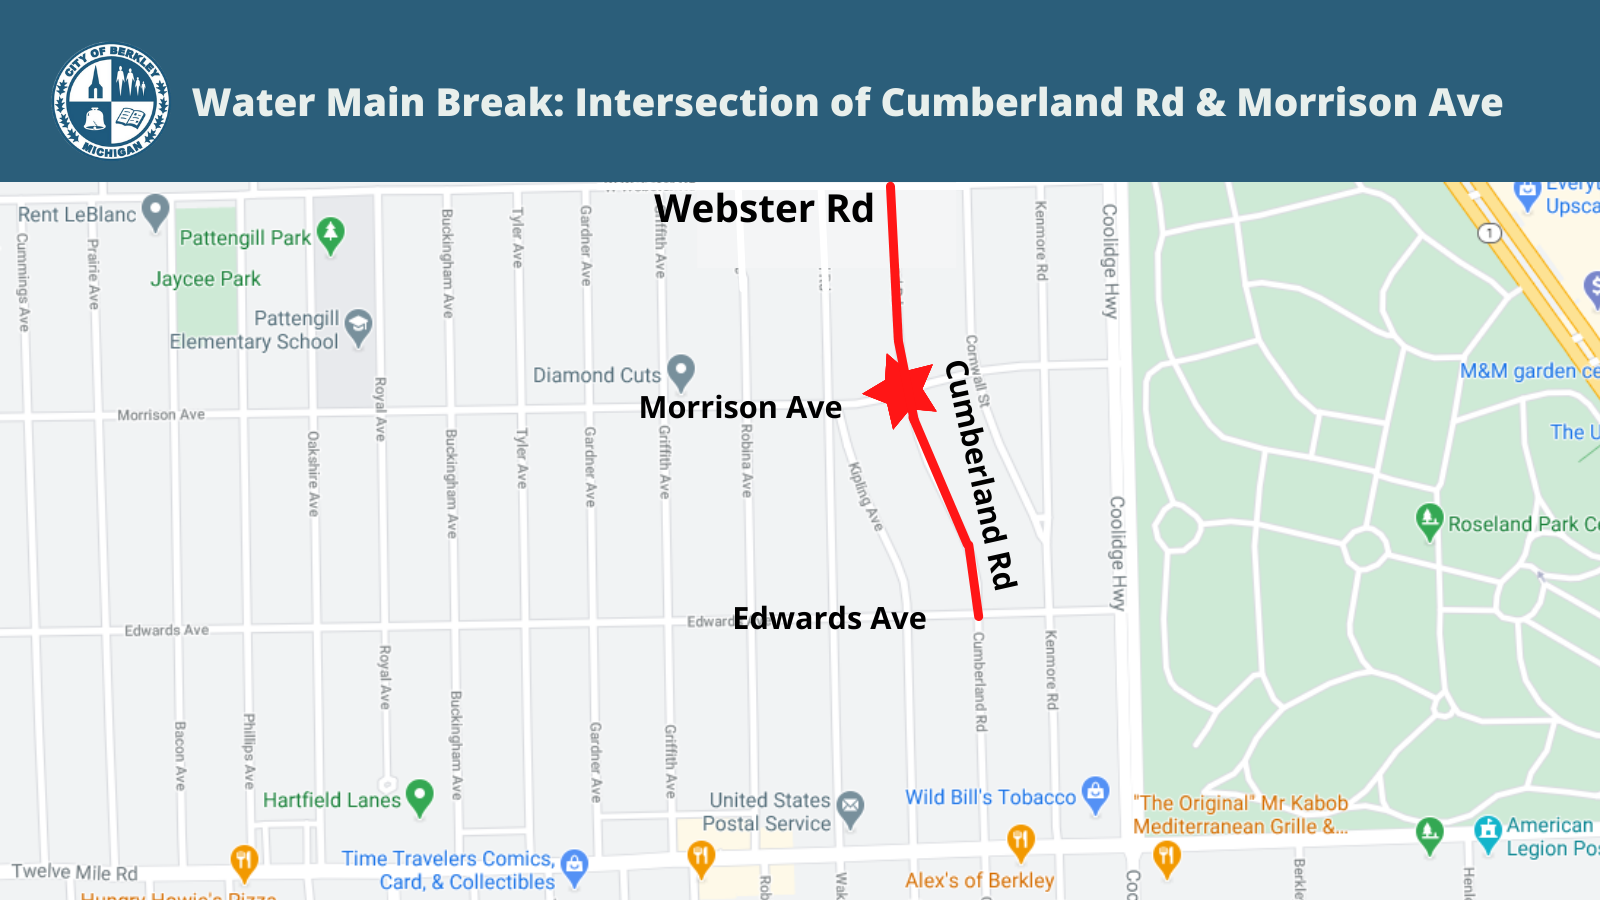 Water Main Break Maps_Cumberland from Webster to Edwards